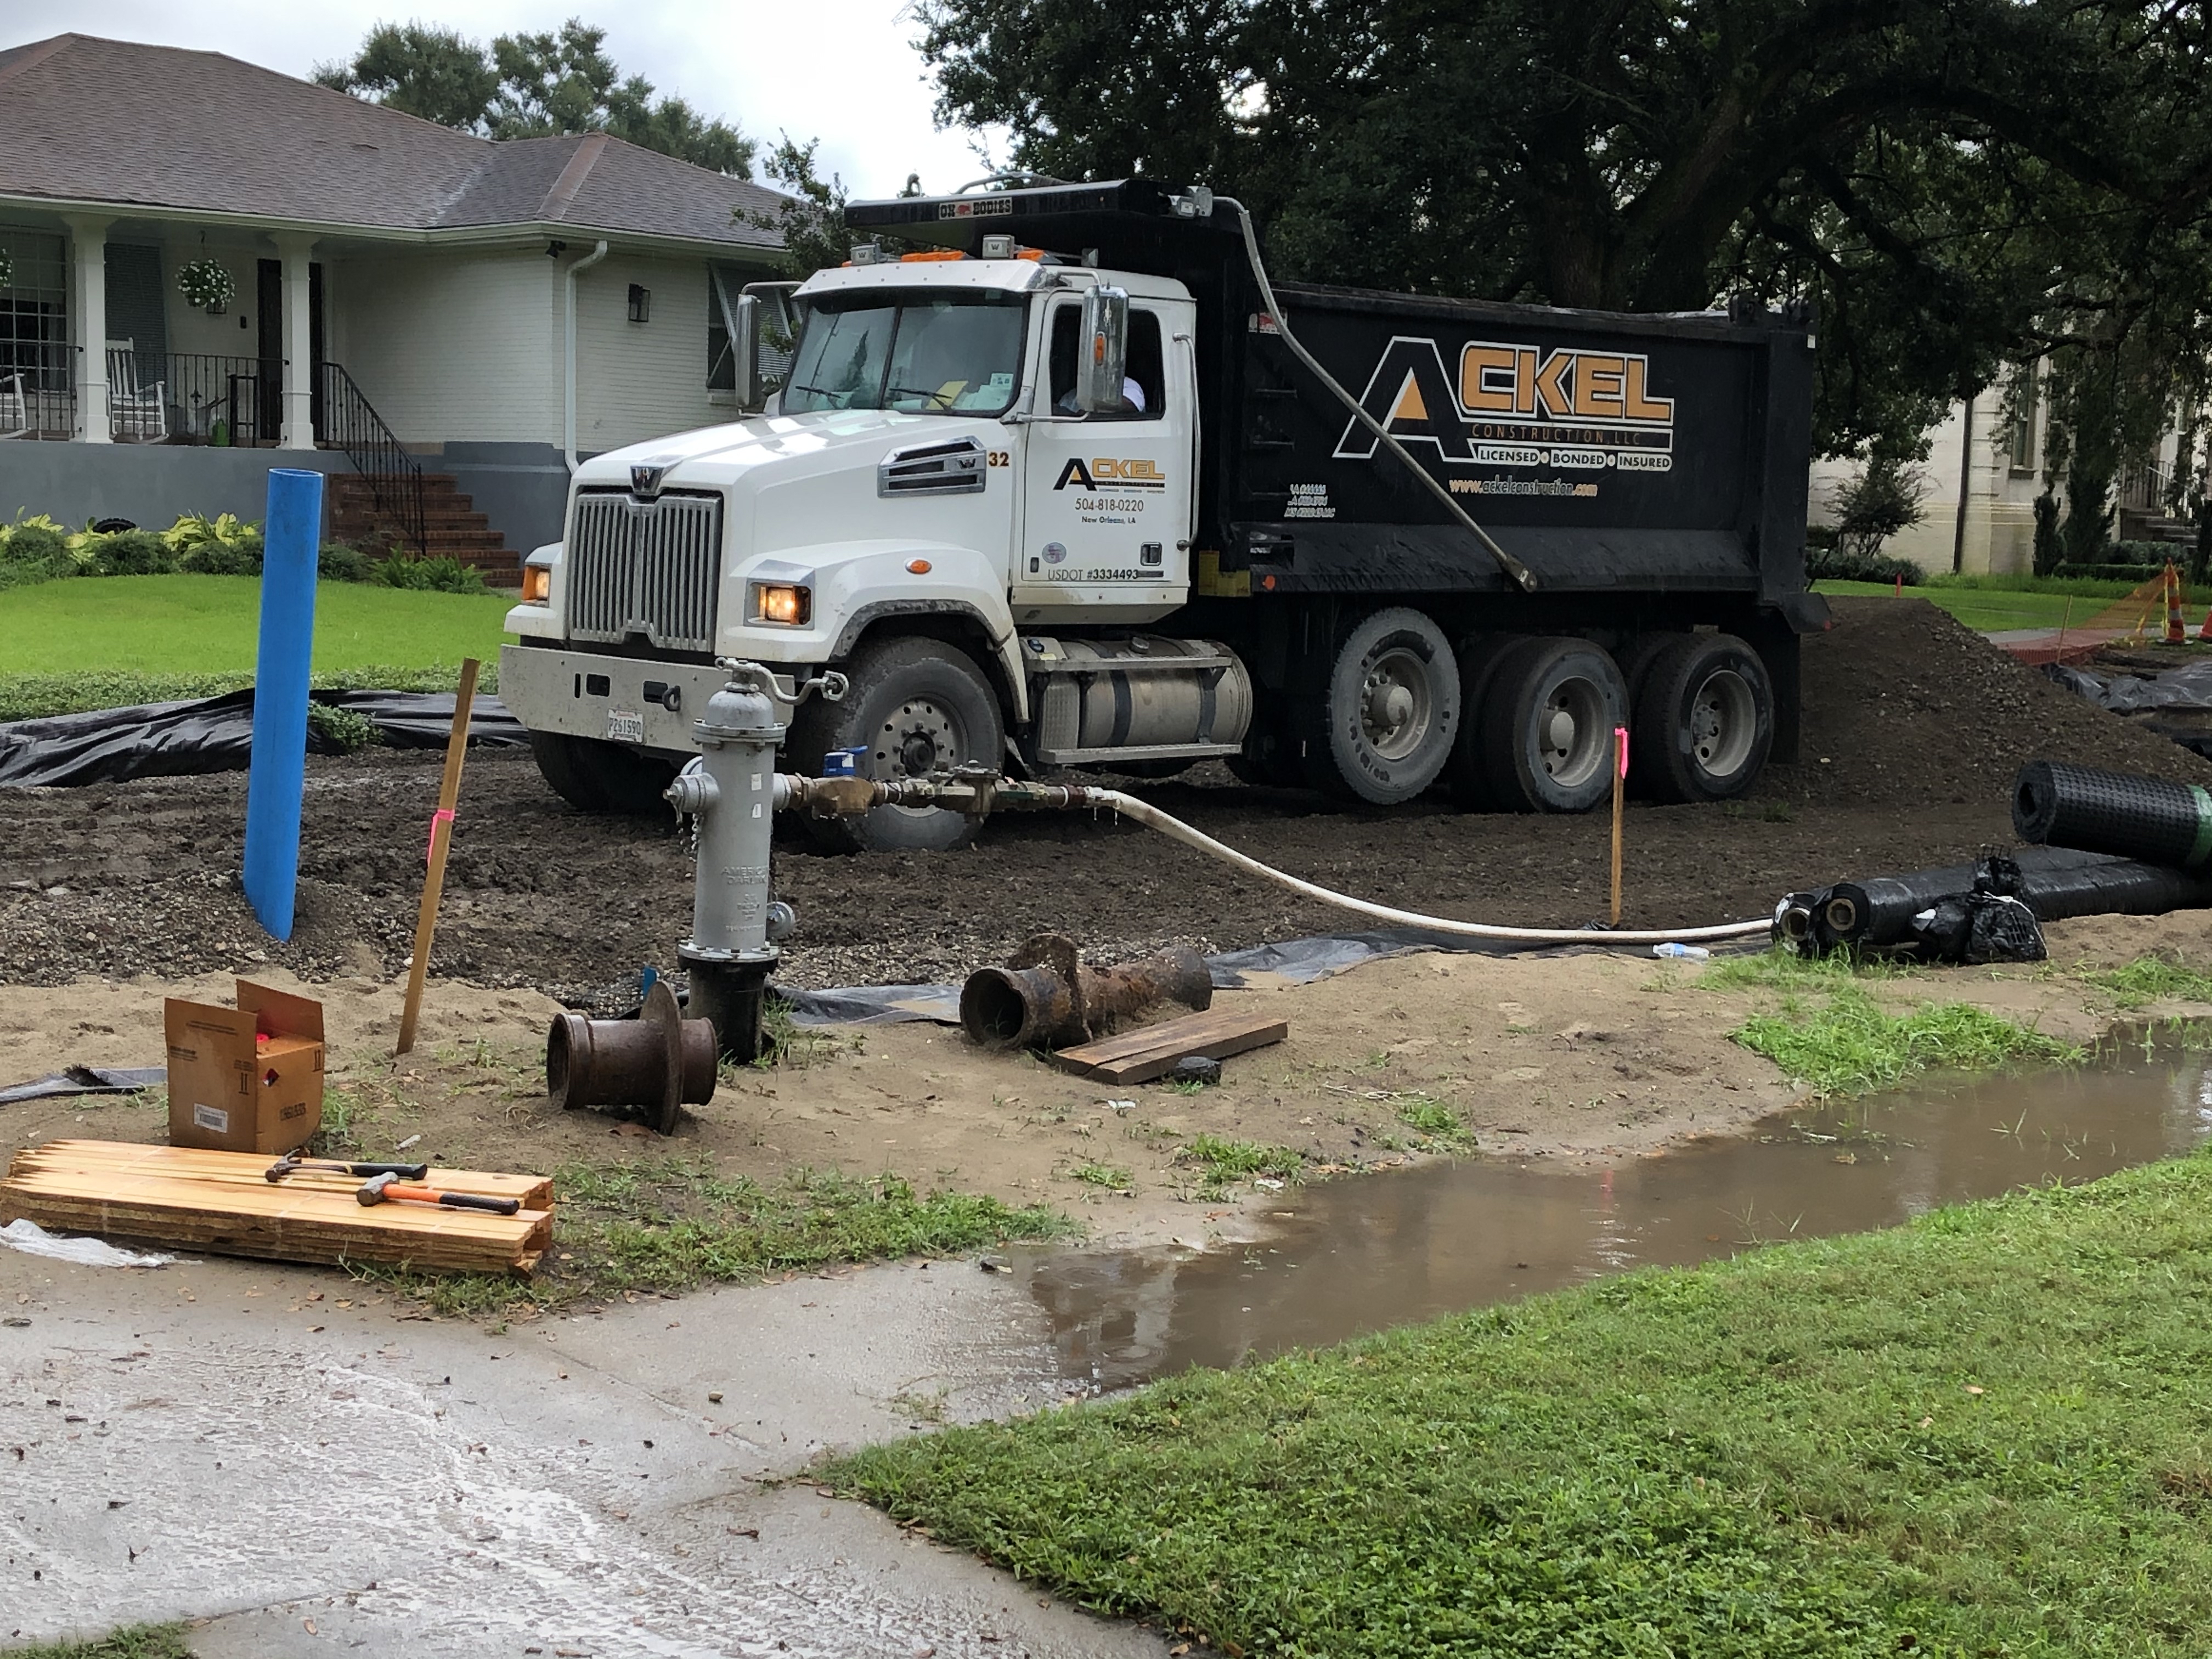 FILMORE NORTH GROUP B CREWS MOVE TO STREETS, CONTINUE WATER LINE REPAIR